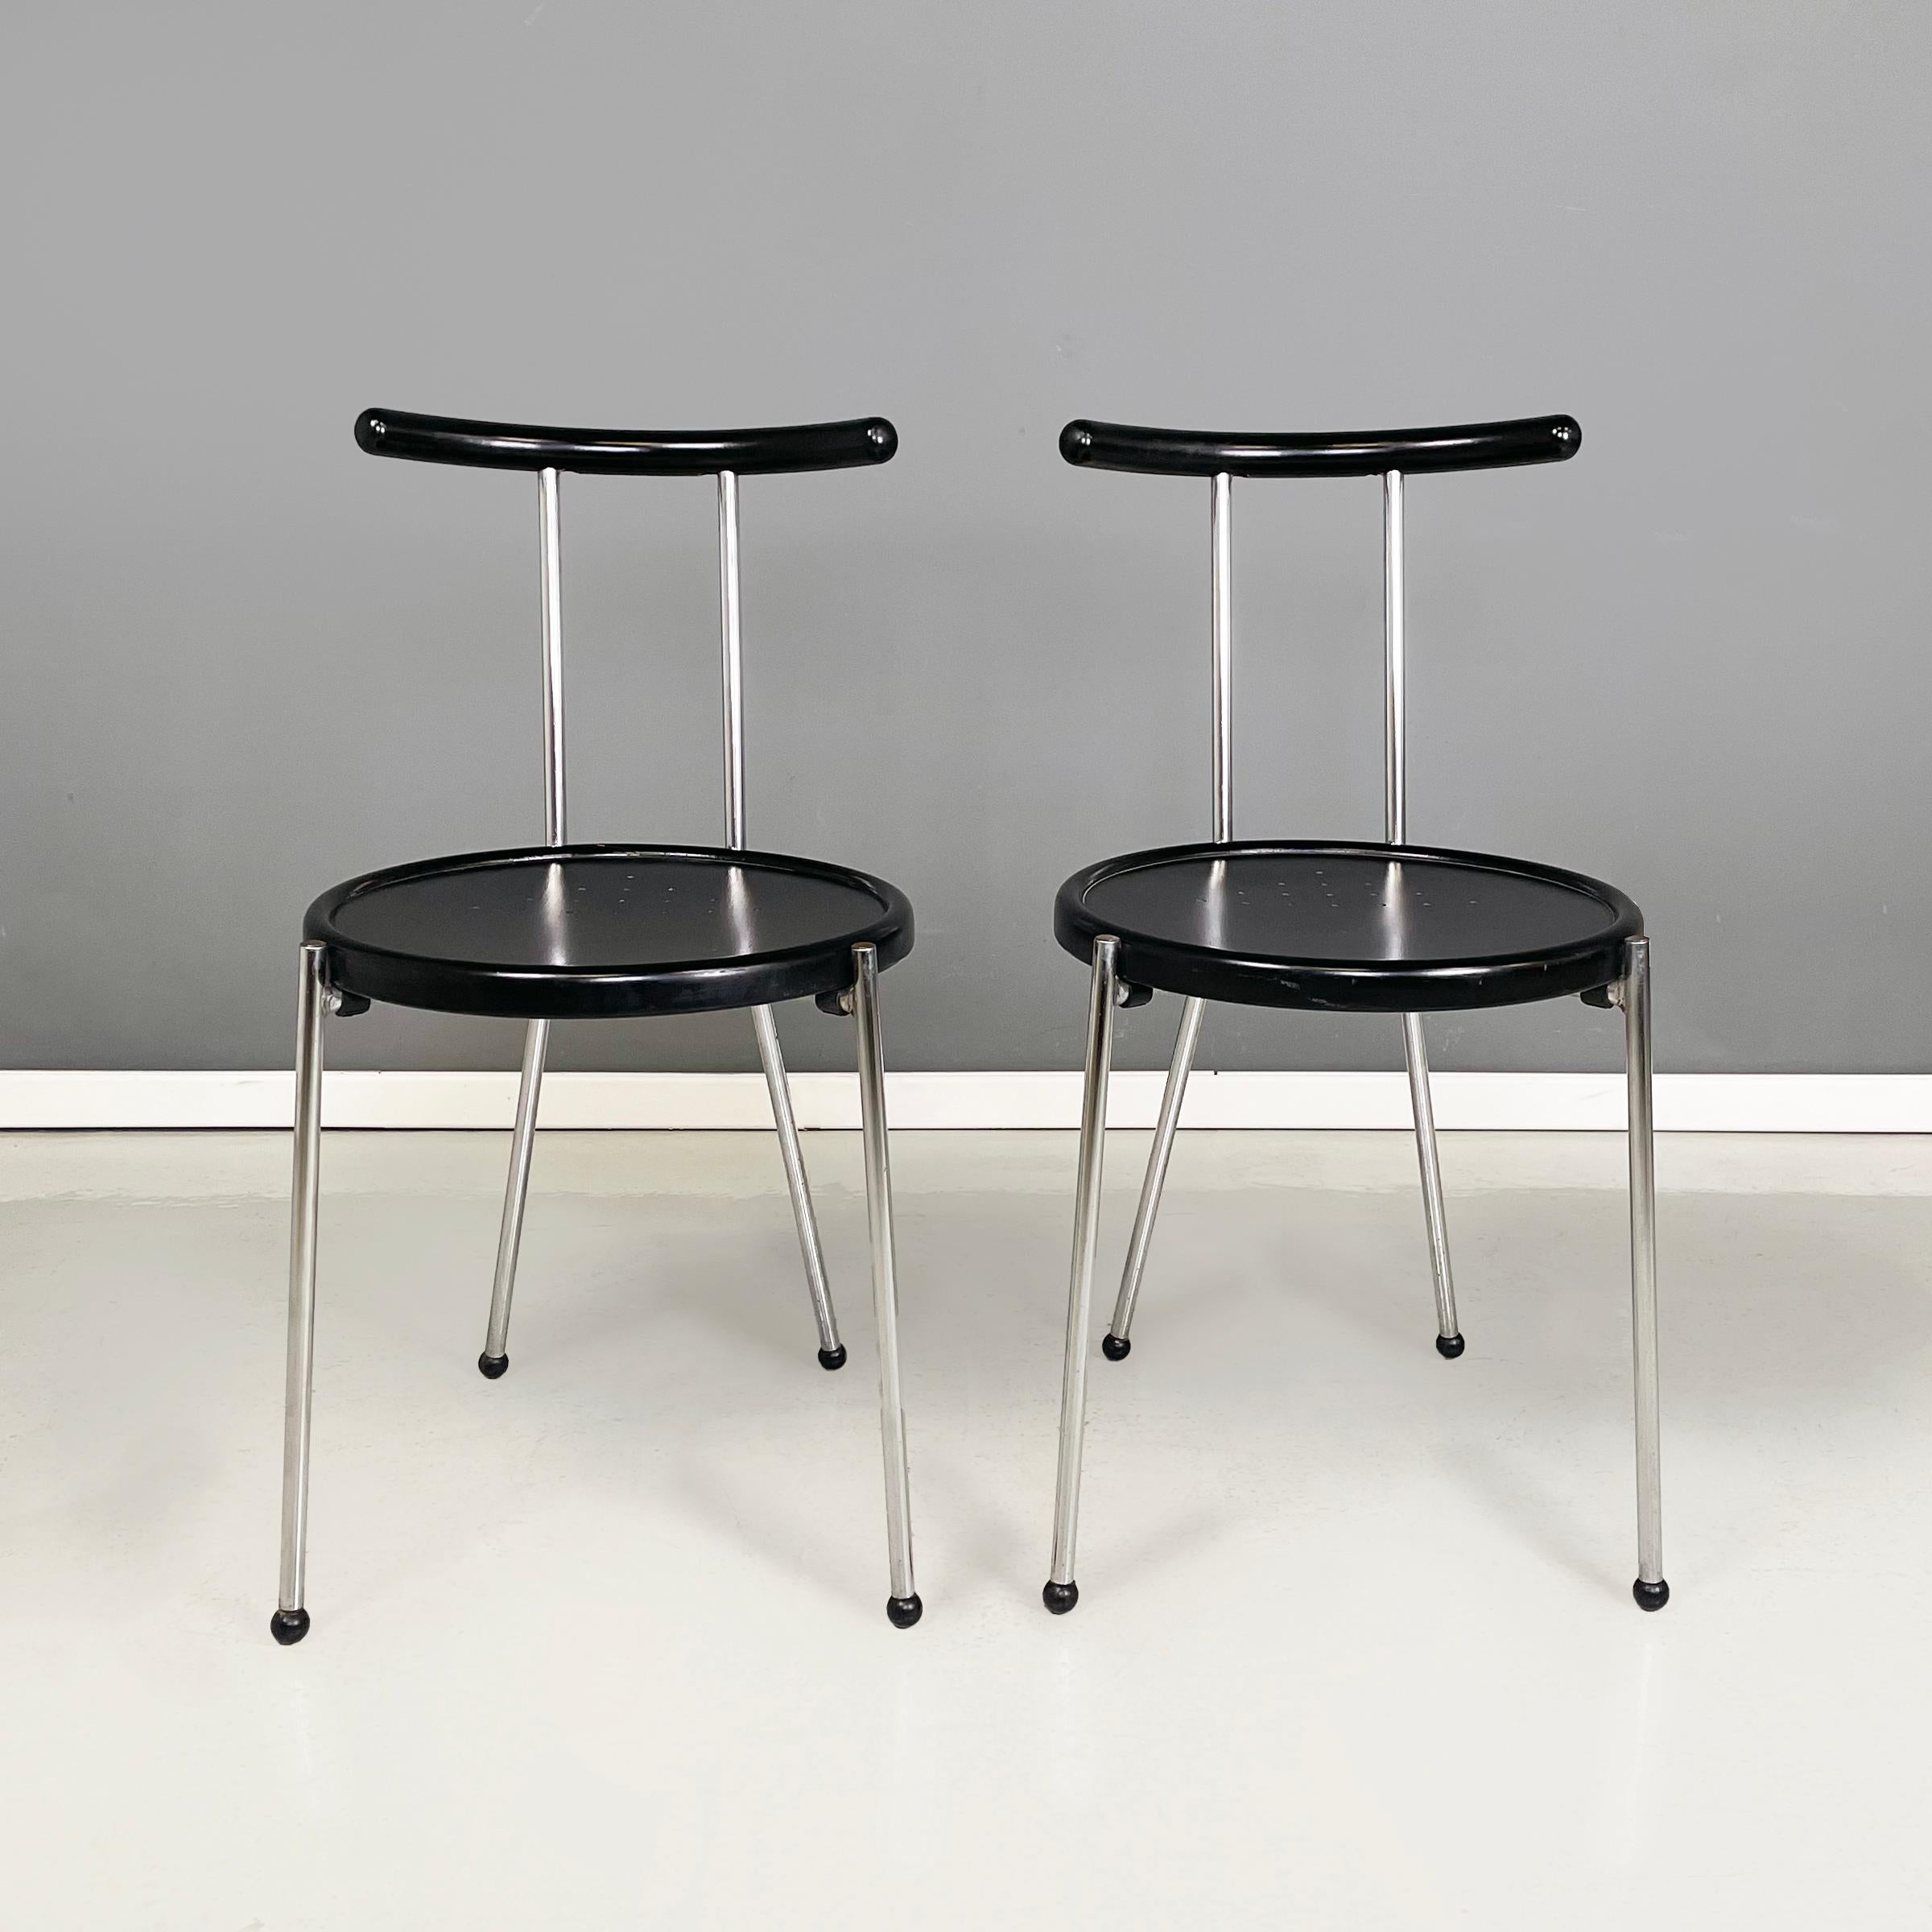 Italian modern round Chairs in black wood and metal rod, 1980s
Pair of chairs with round perforated seat in black painted wood. Curved backrest in black painted wood with metal rod structure. Metal rod legs with black spherical feet.
They are from